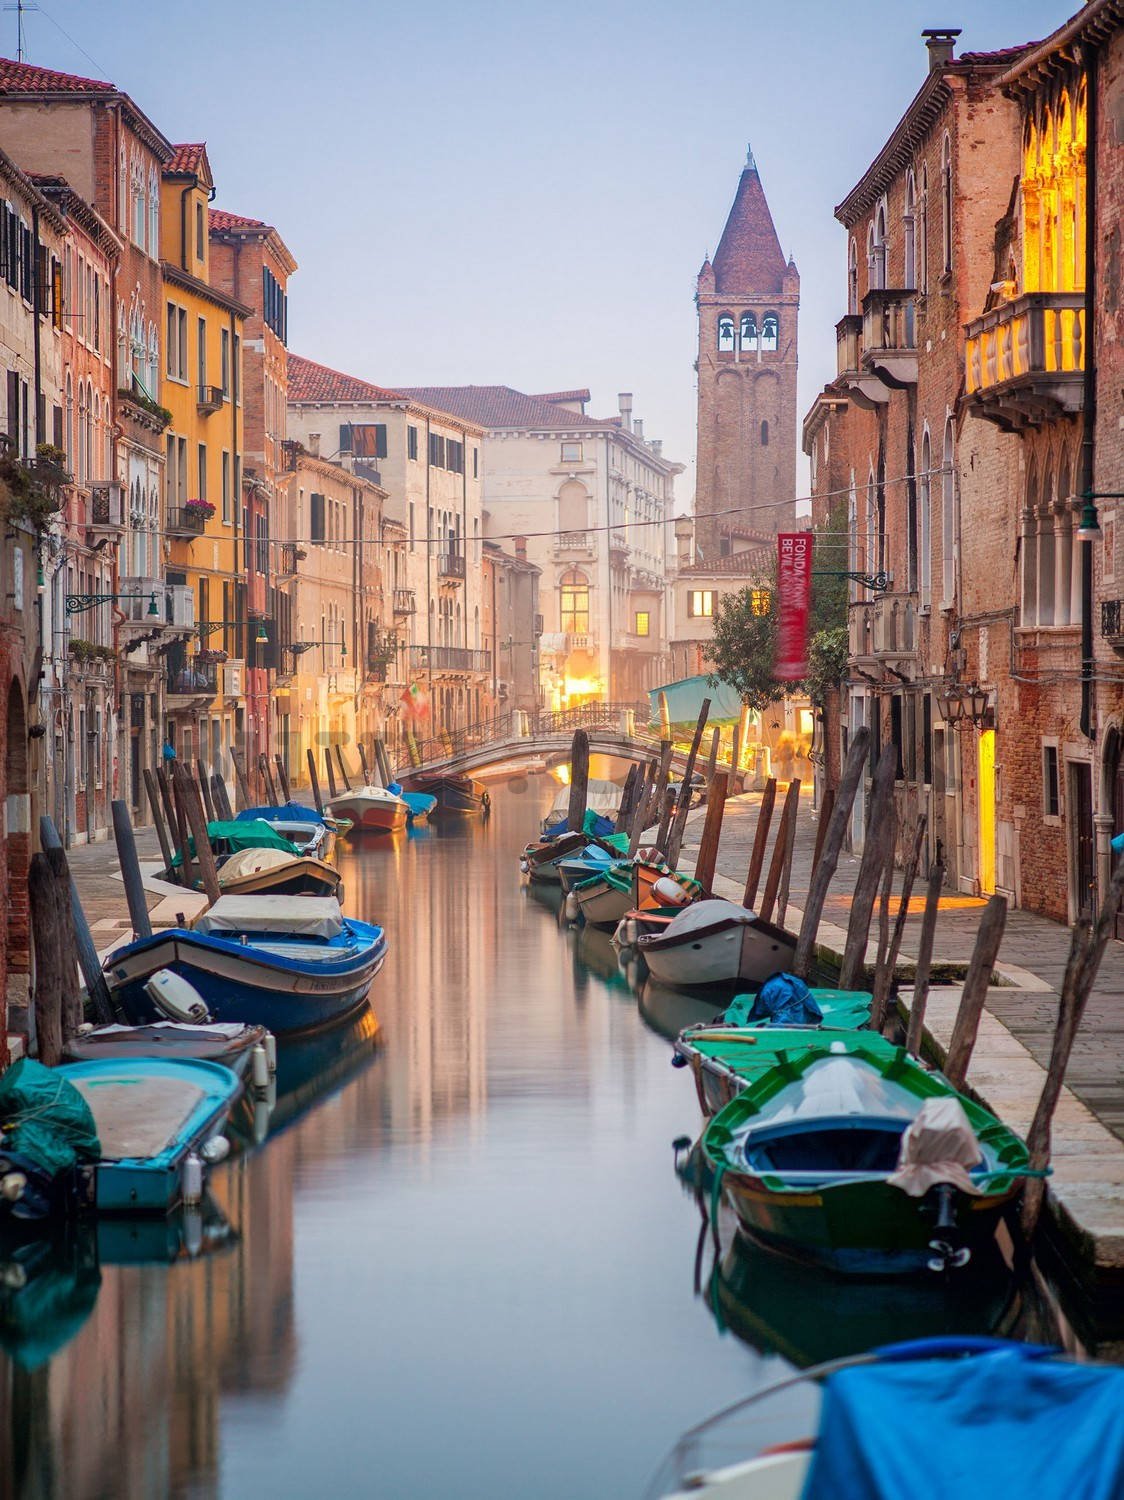 Wall mural: Venice (water canal) - 184x254 cm